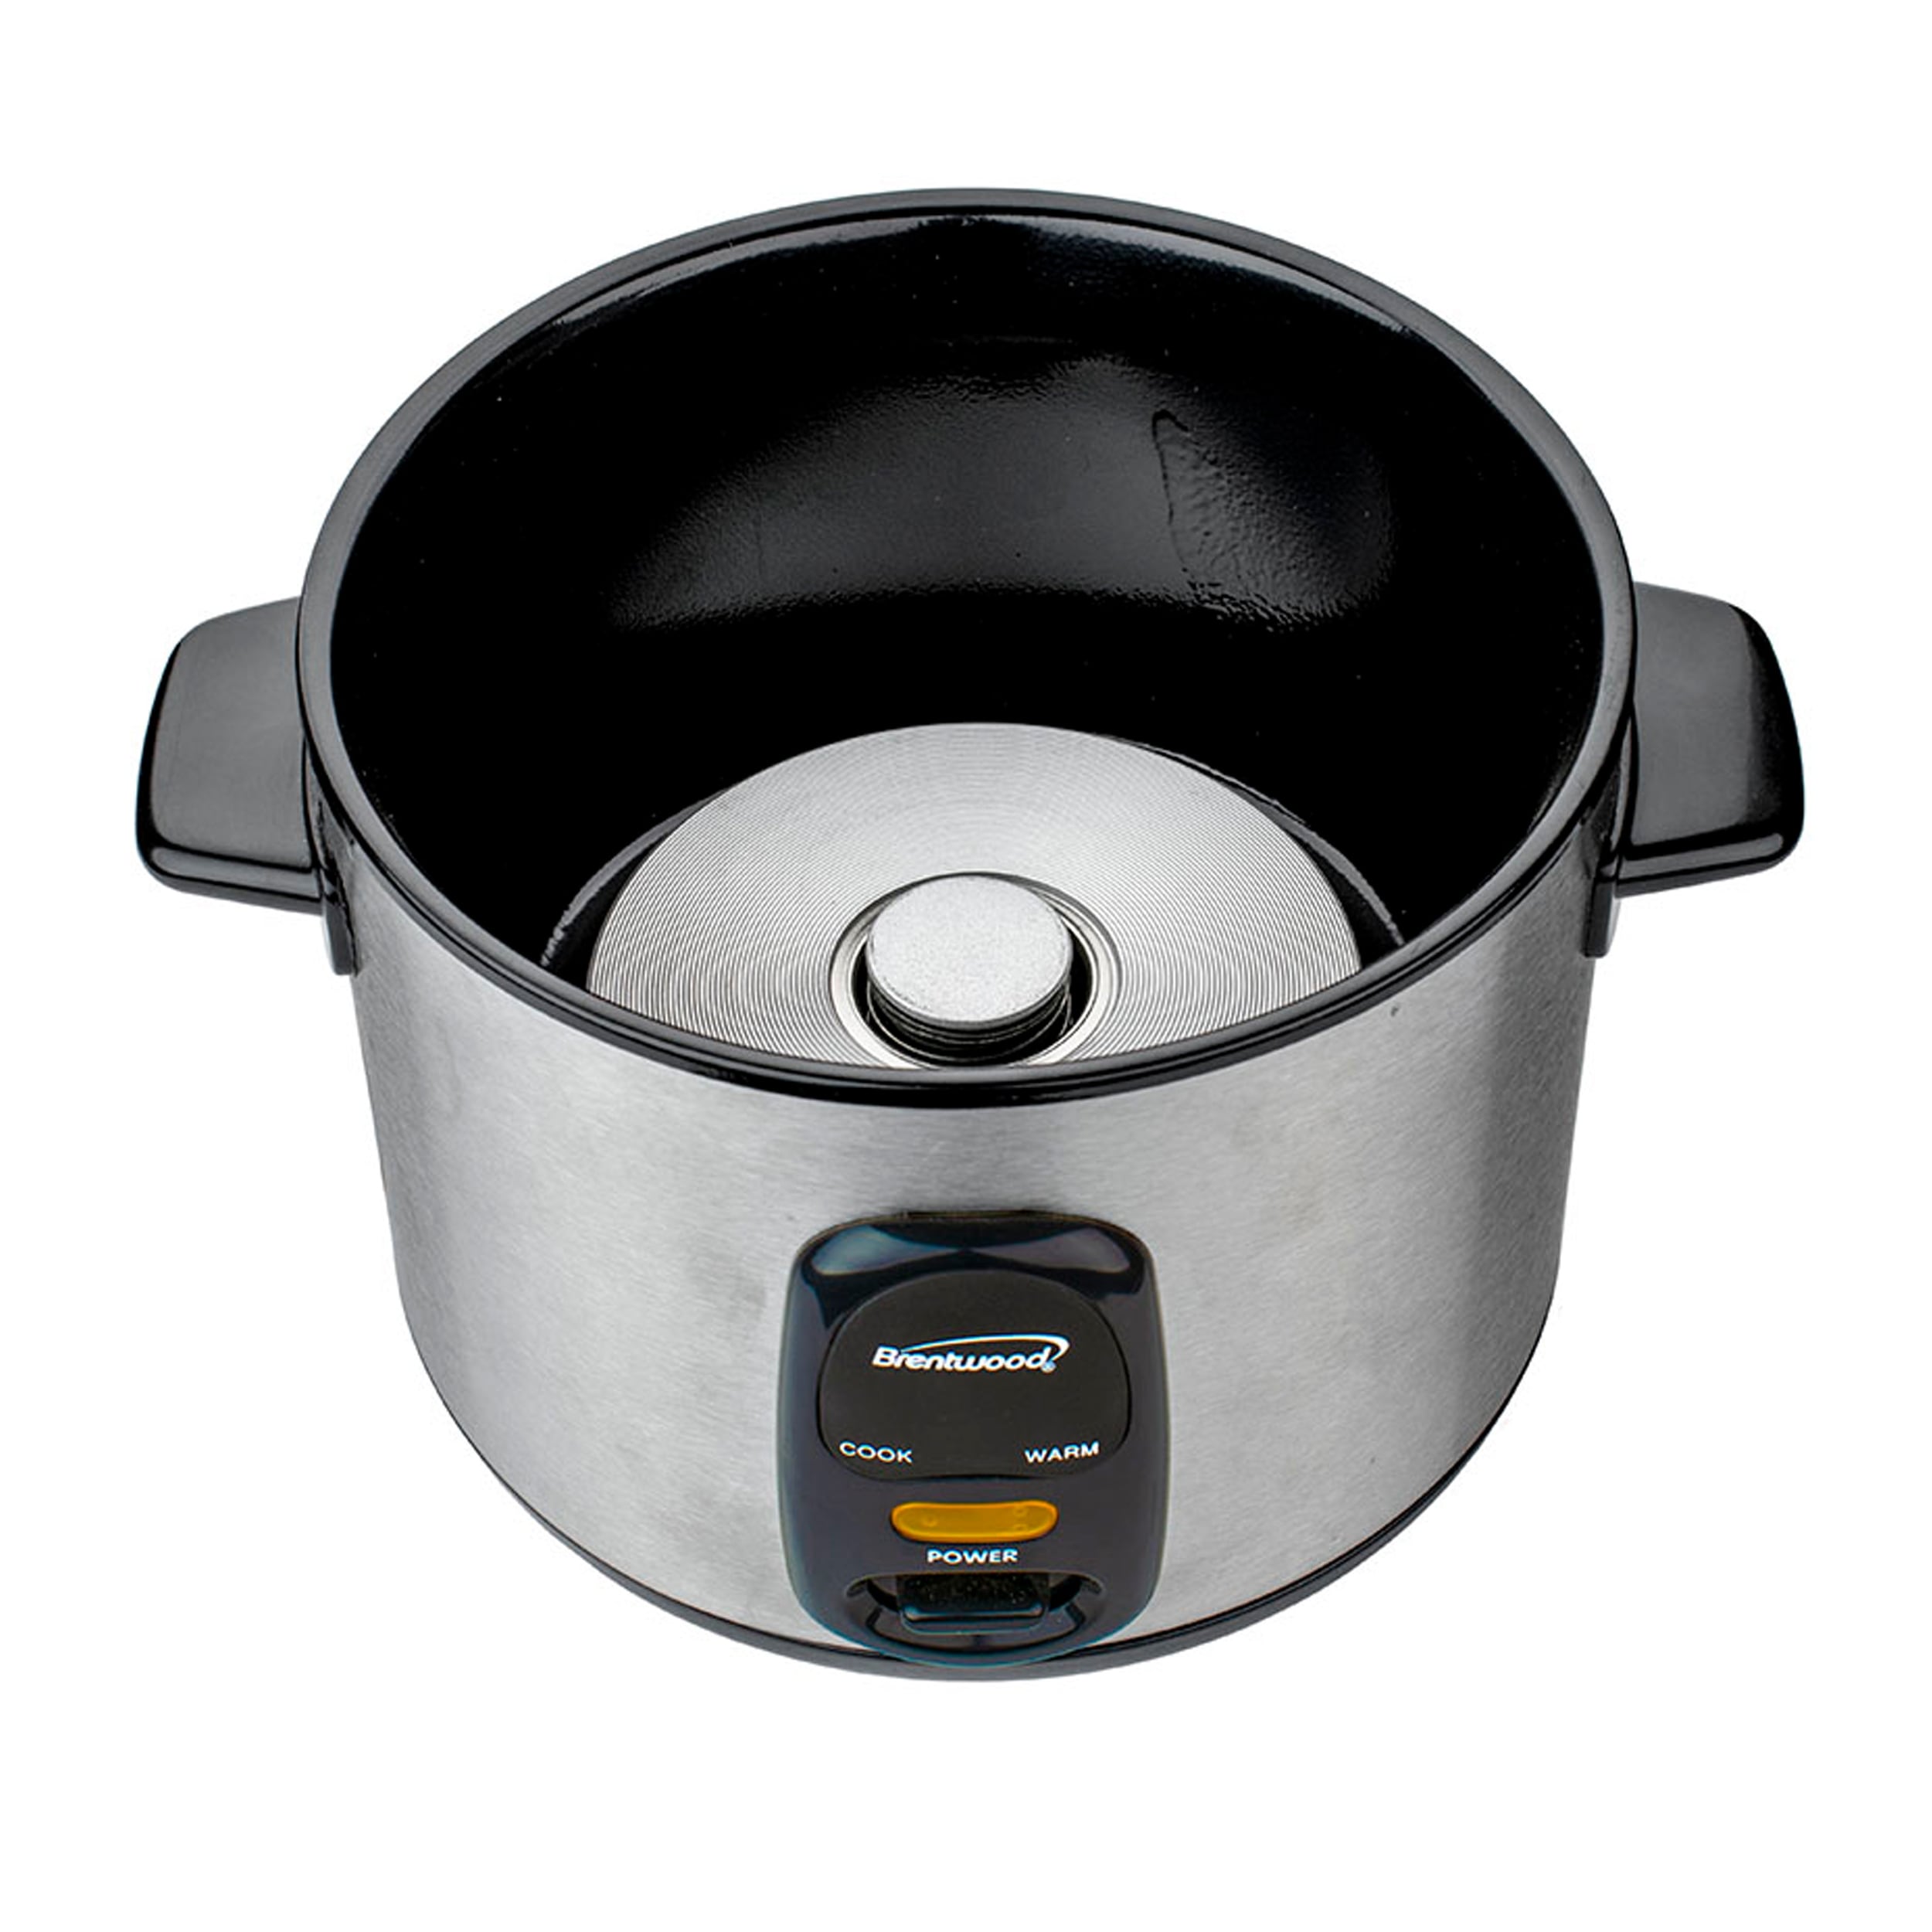 https://ak1.ostkcdn.com/images/products/is/images/direct/03eee3fe7c5304f41f8038f85de921be1b73b53f/8-Cup-Nonstick-Rice-Cooker-with-Steamer.jpg